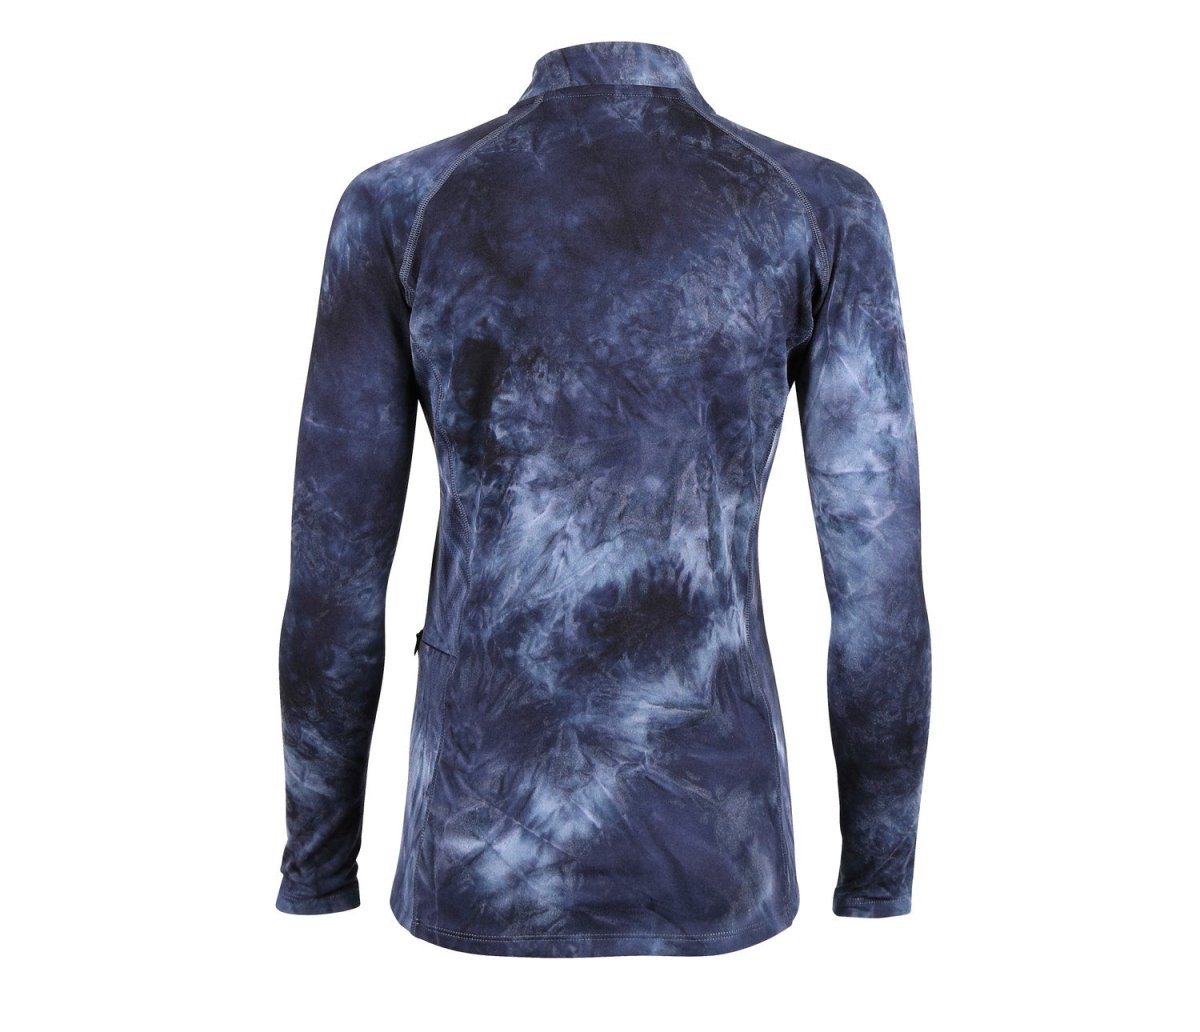 Aubrion SS24 Revive Long Sleeve Base Layer - Young Rider - Navy TyeDye - 11/12 Years